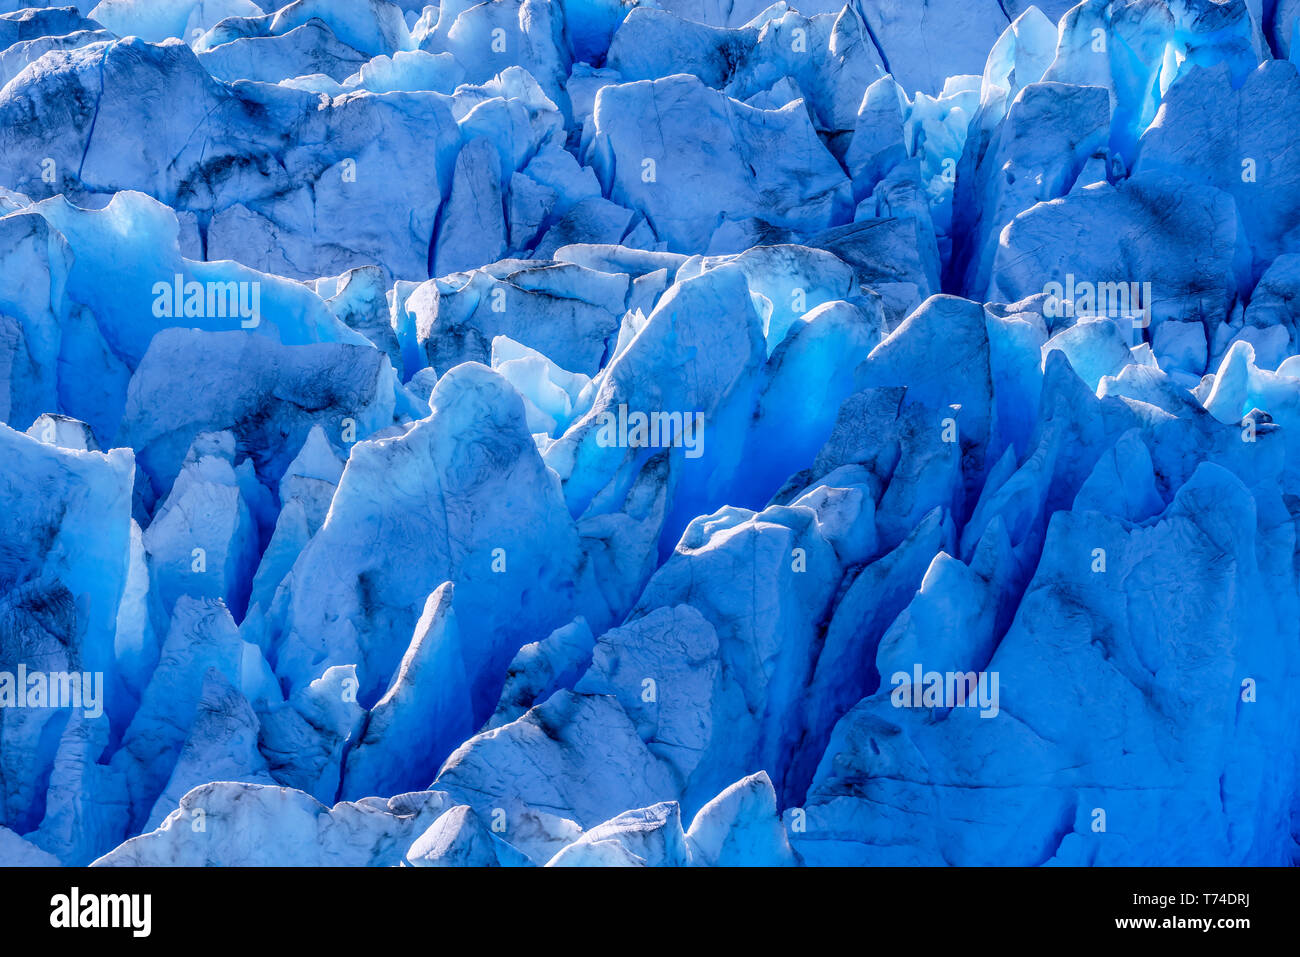 Blue glacial ice is exposed in crevasses on Hole in the Wall Glacier, Juneau Icefield, Tongass National Forest; Alaska, United States of America Stock Photo